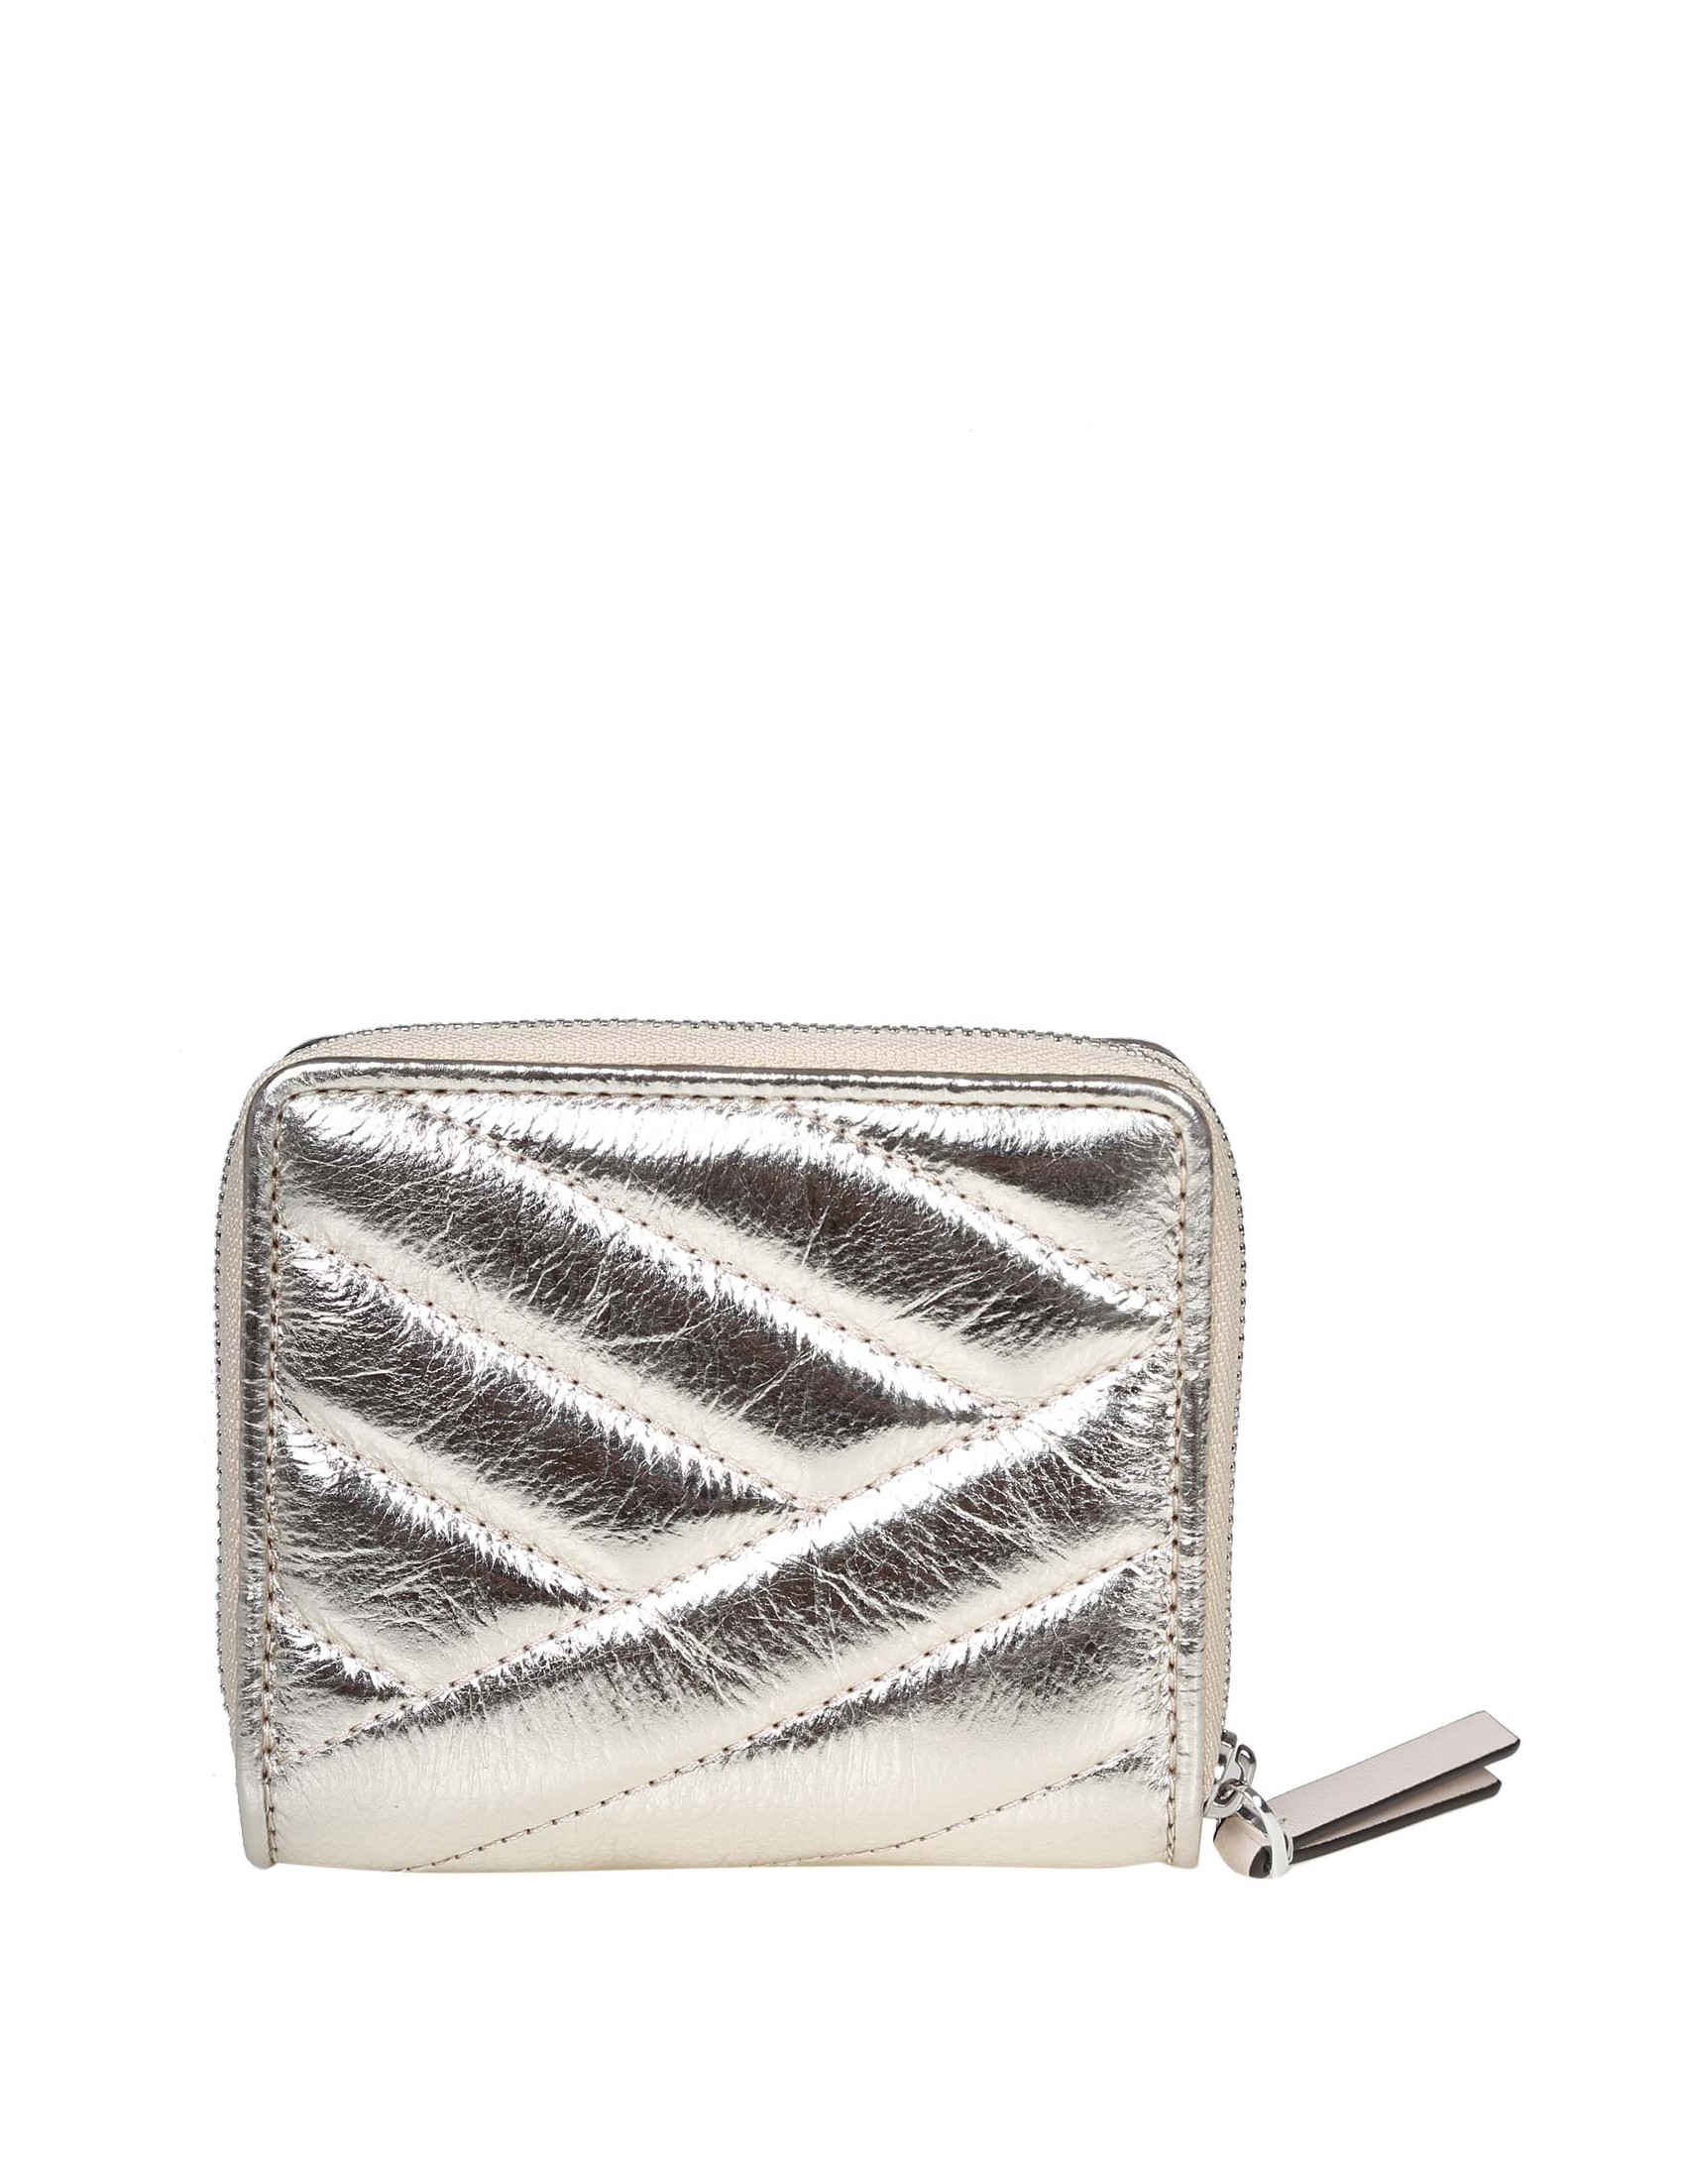 TORY BURCH KIRA CHEVRON WALLET IN PLATINUM LAMINATED LEATHER